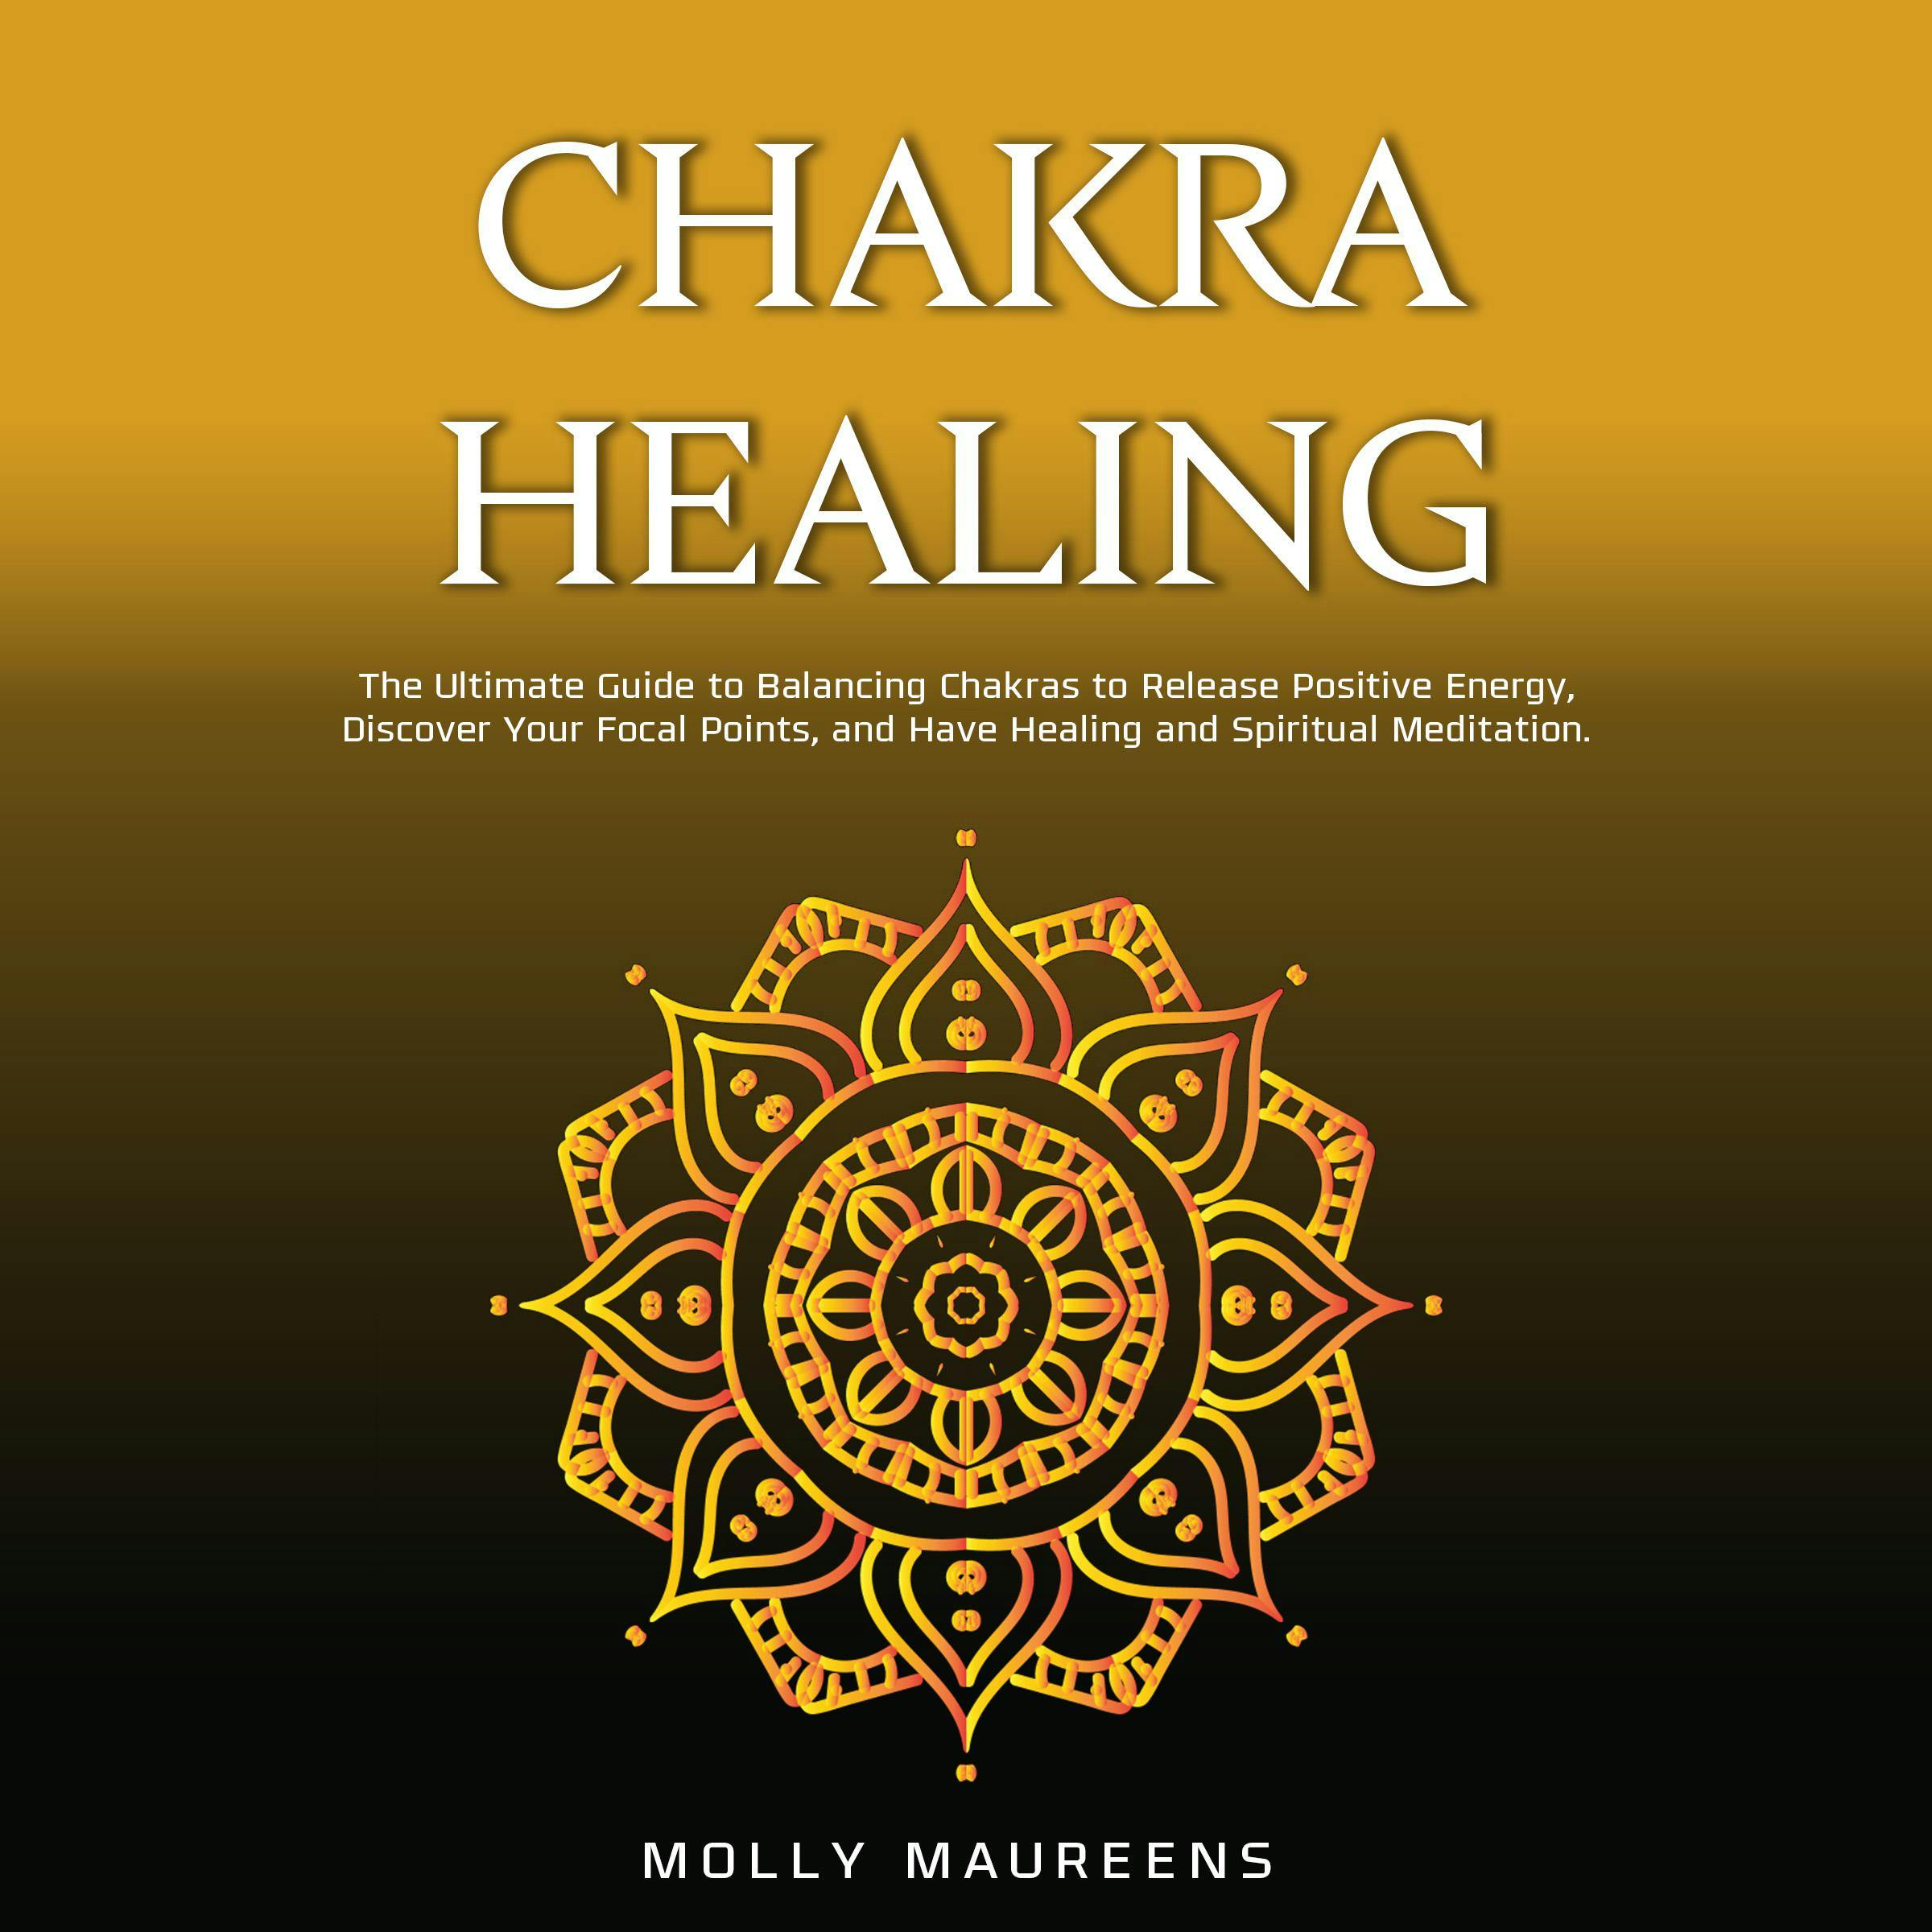 Chakra Healing: The Ultimate Guide to Balancing Chakras to Release Positive Energy, Discover Your Focal Points, and Have Healing and Spiritual Meditation. - undefined